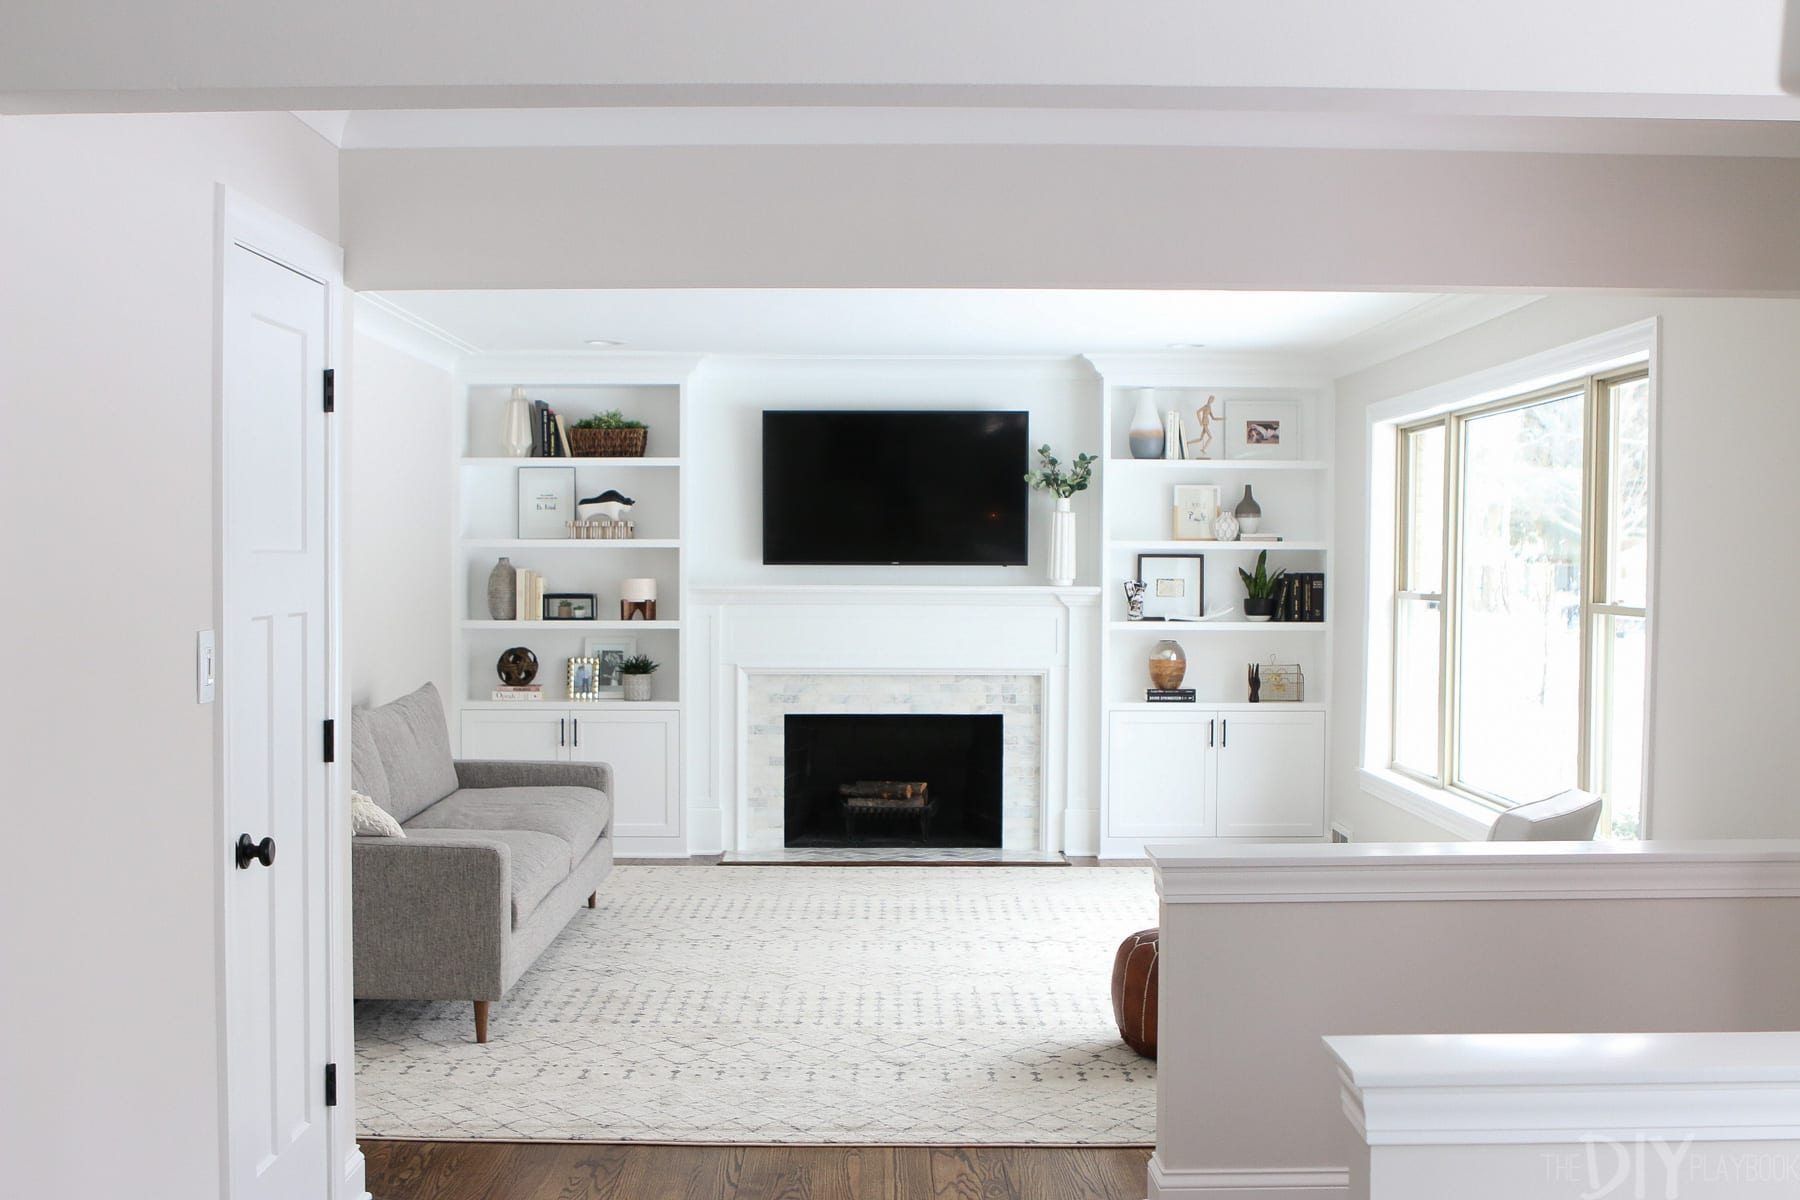 White Built Ins Around The Fireplace, Building Built In Shelves Around Fireplace